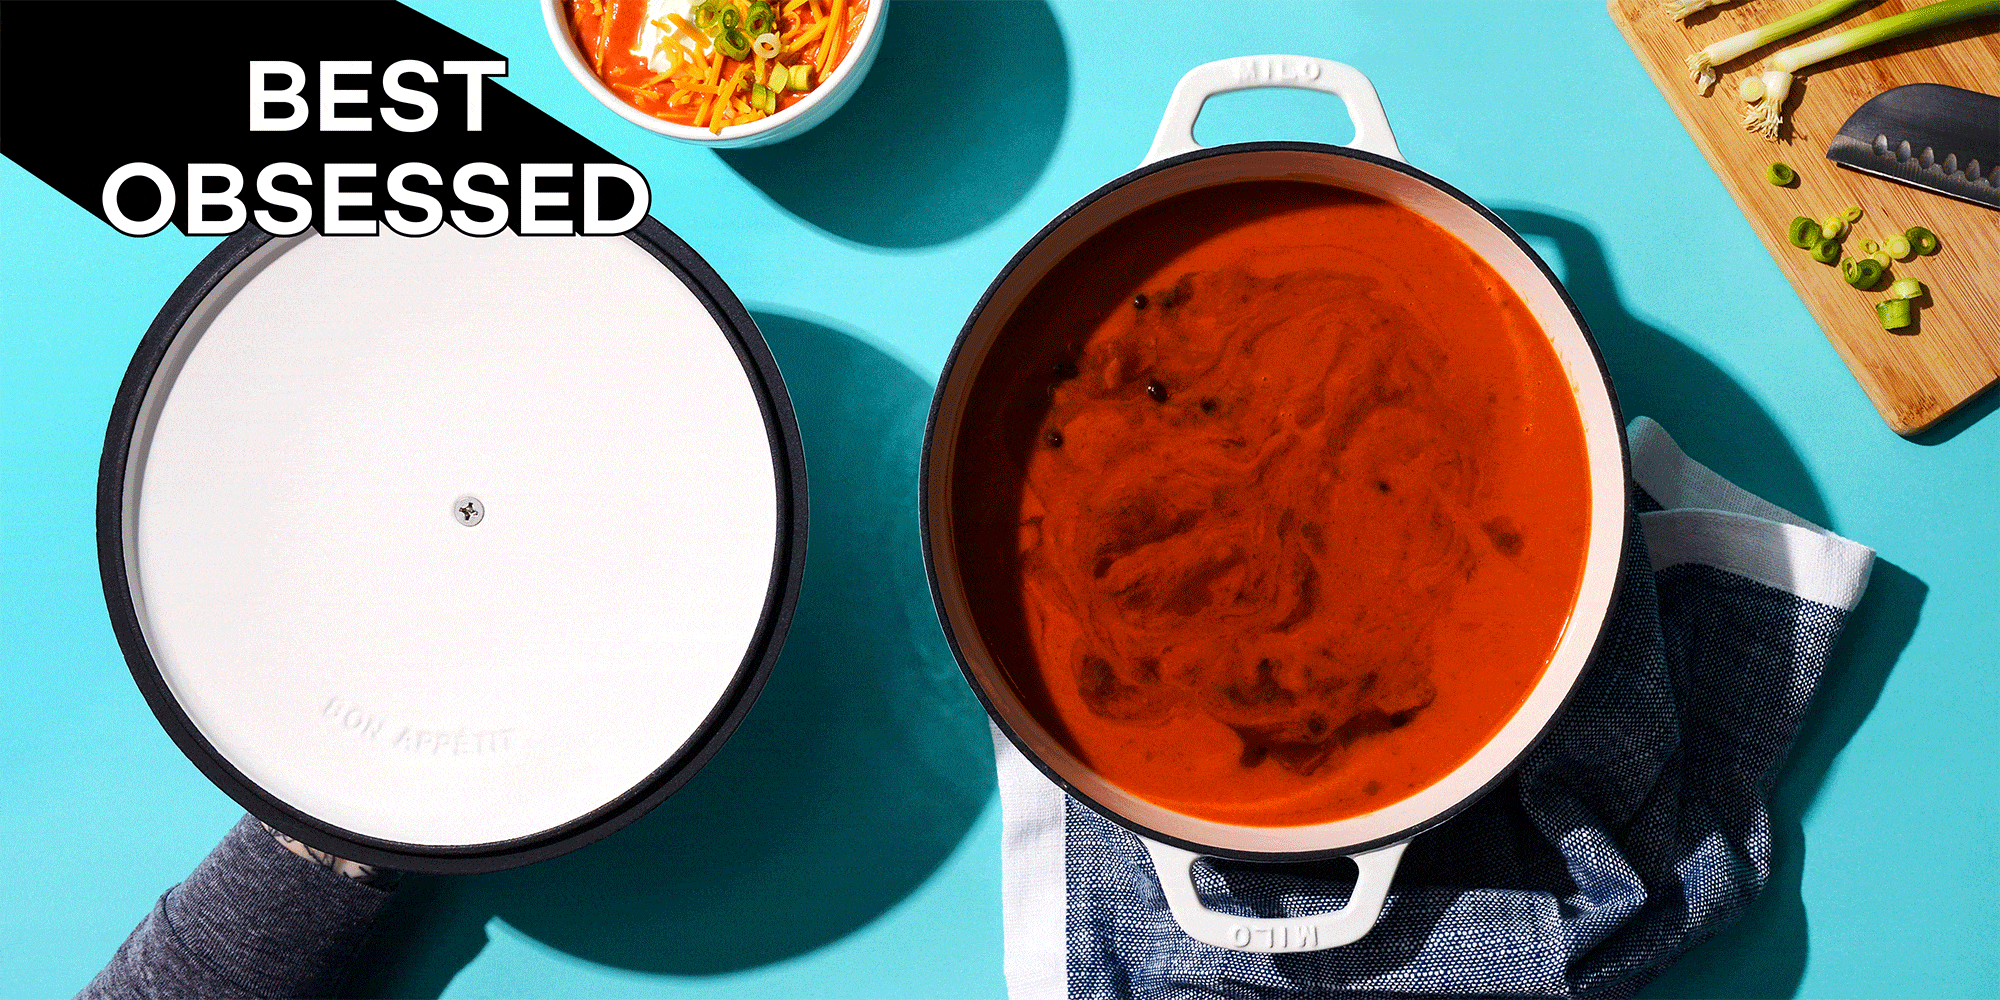 Milo Dutch Oven Review 2019: It's Better and Cheaper Than Le Creuset